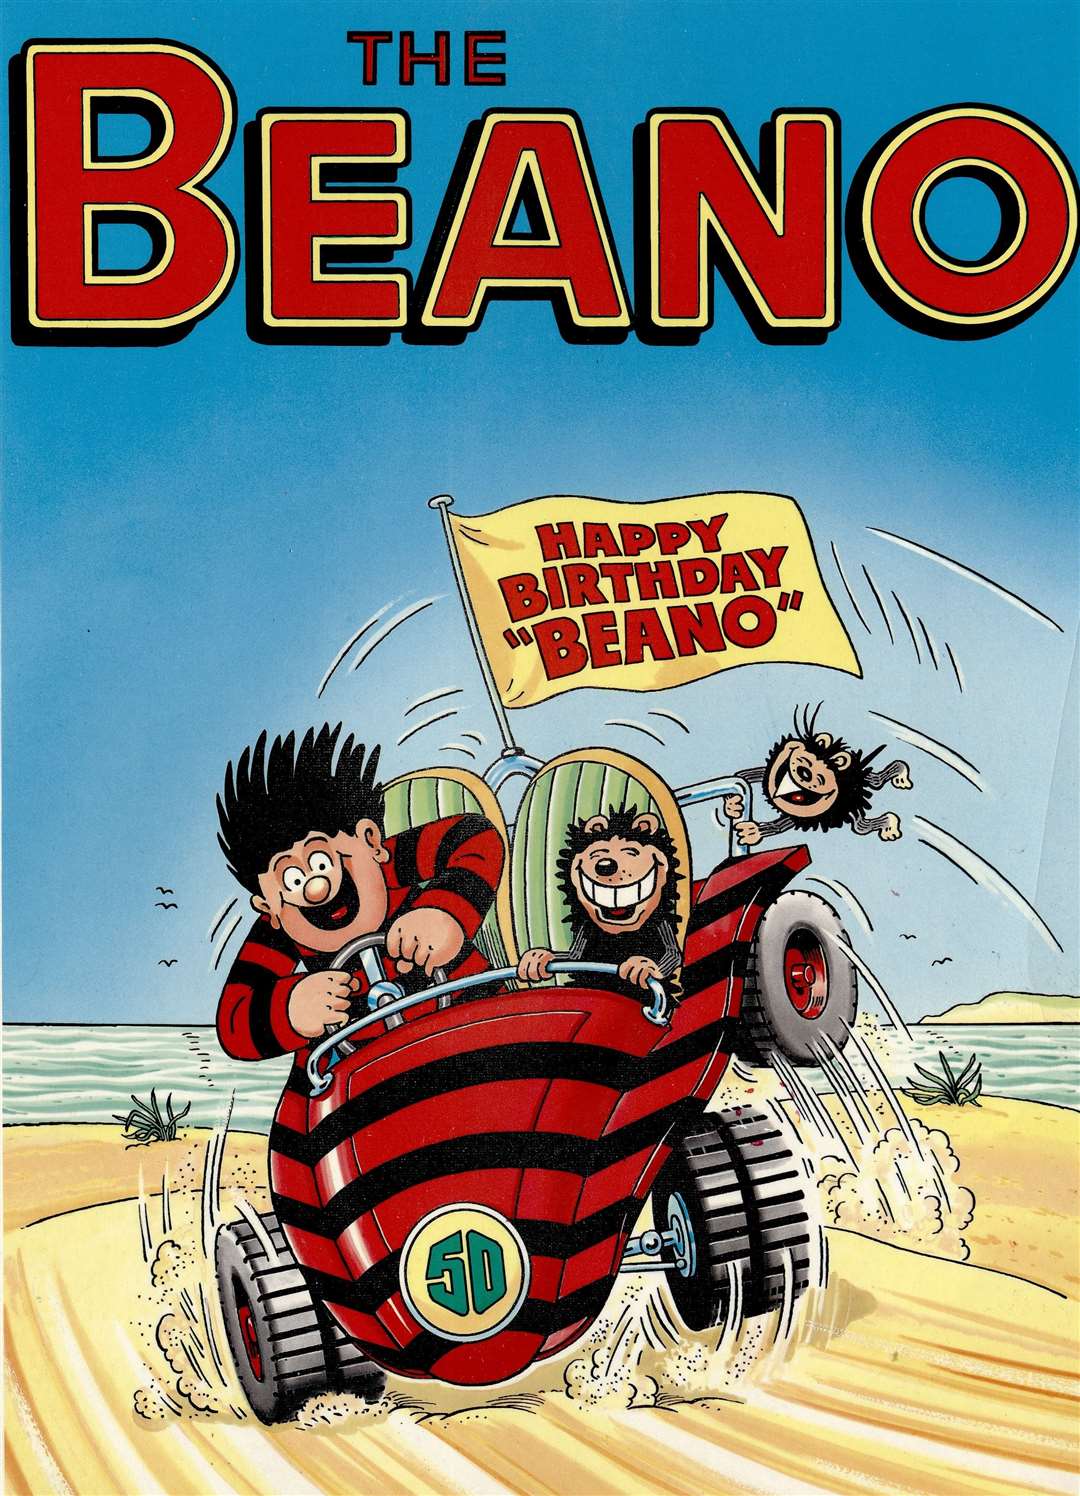 A 1988 Beano cover by Sutherland (DC Thomson/PA Media)